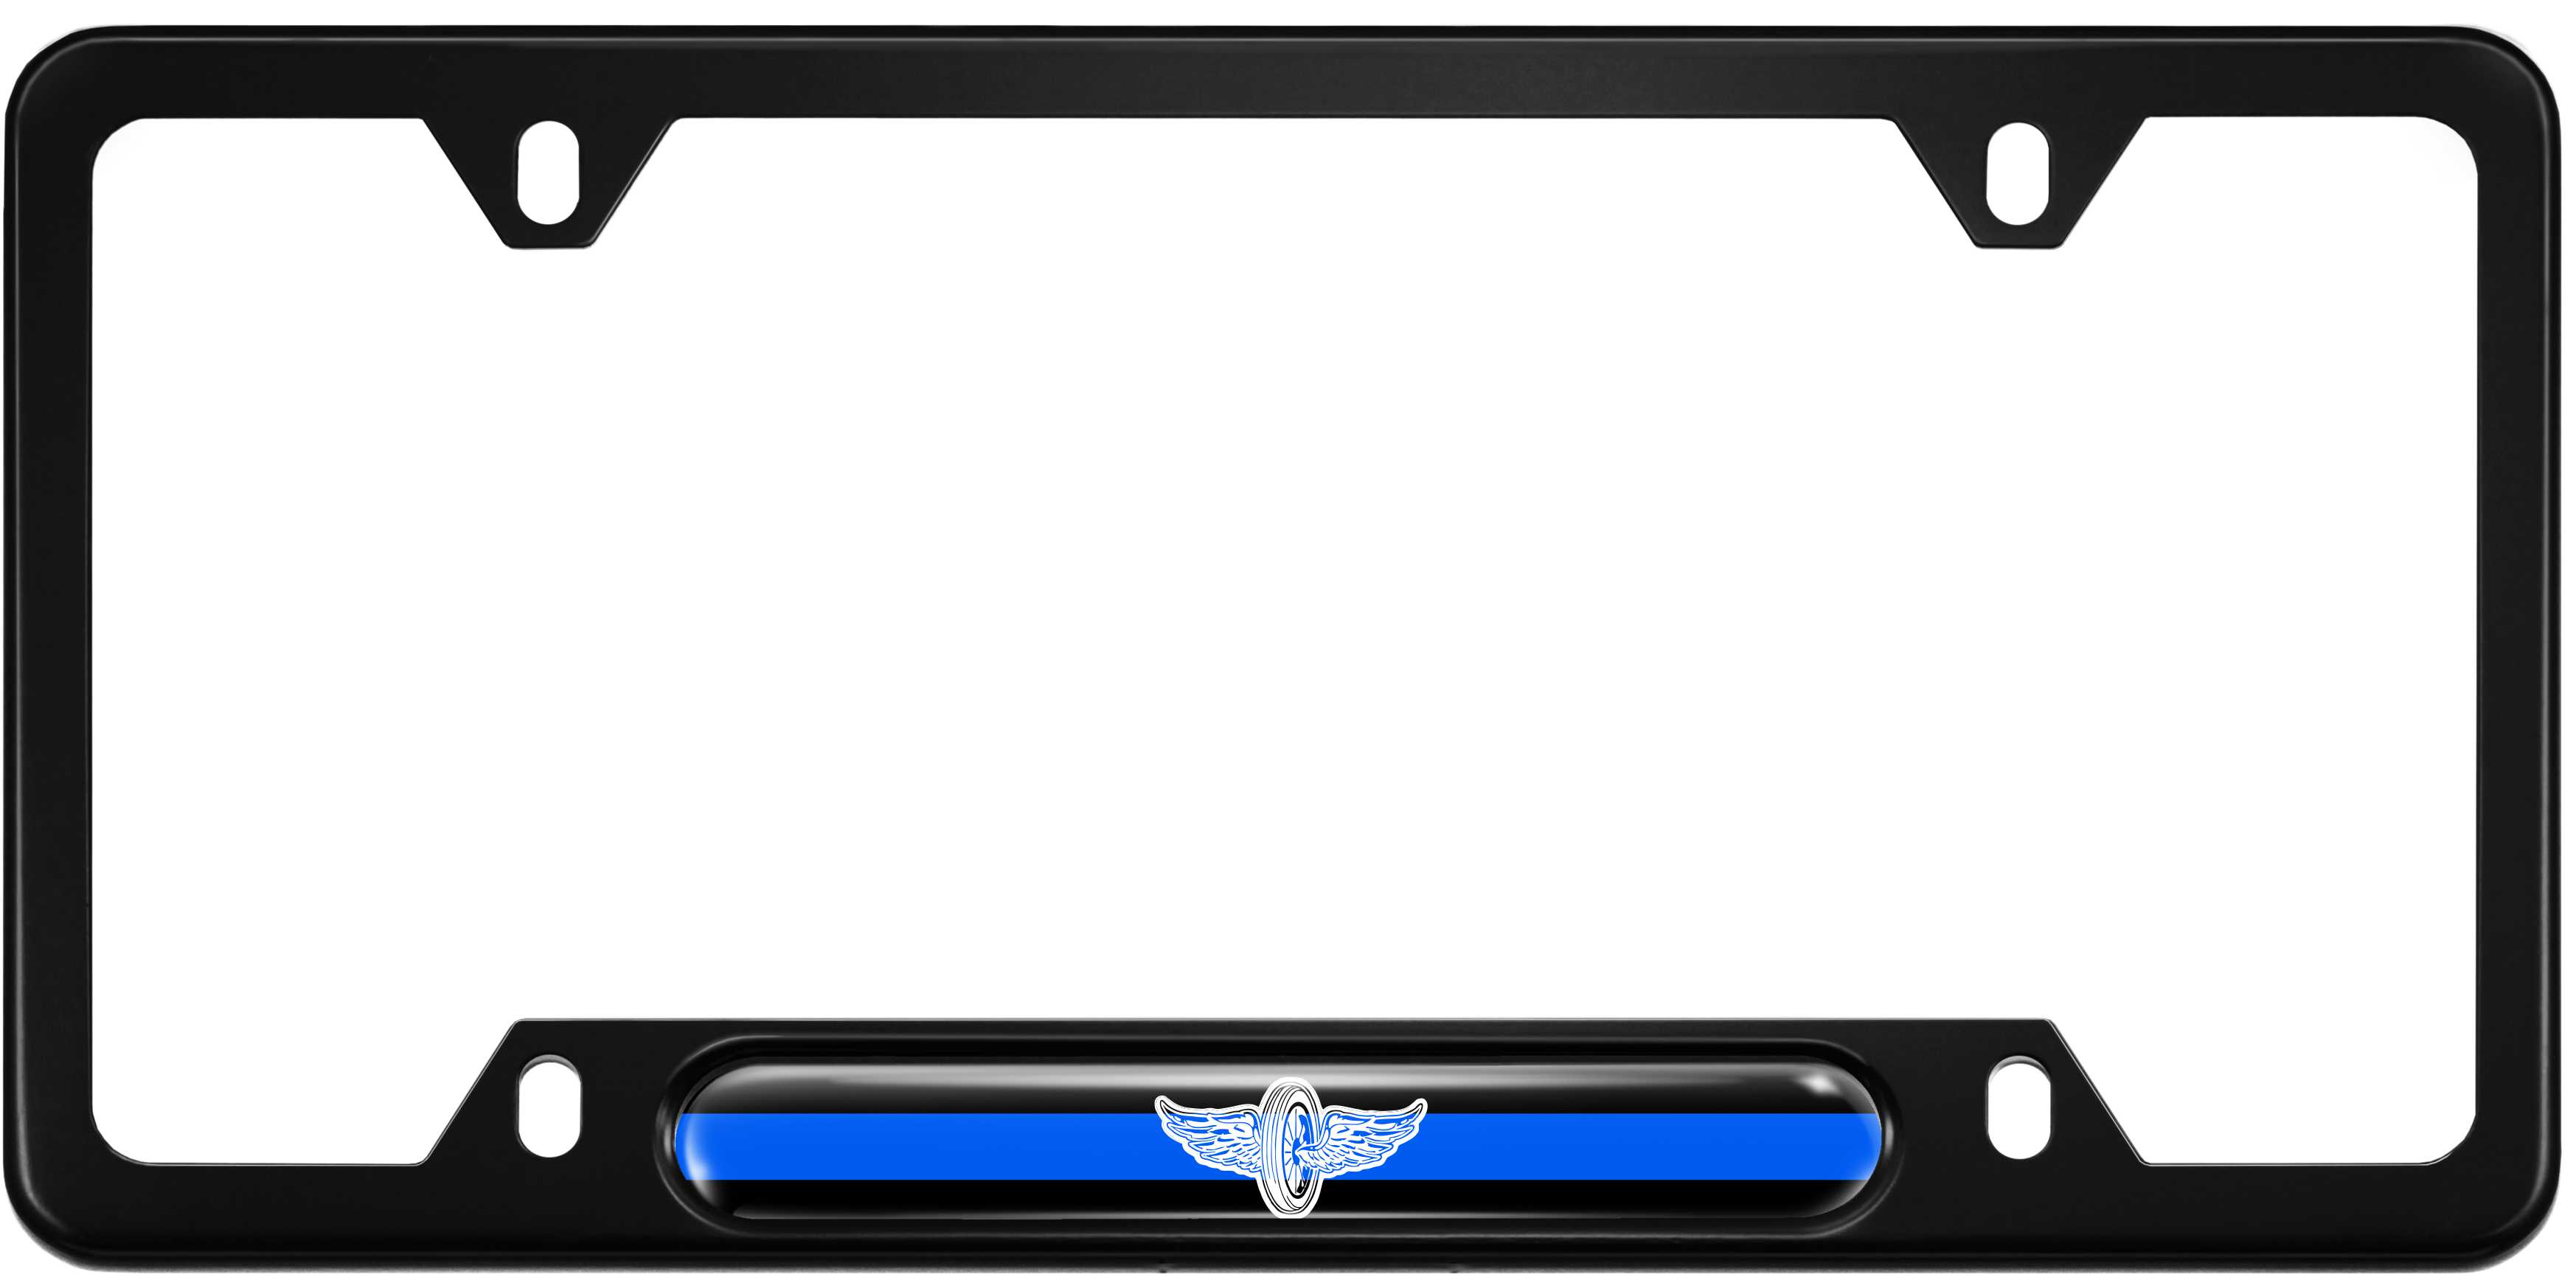 Thin Blue Line with Wings - custom Car aluminum license plate frame - Black